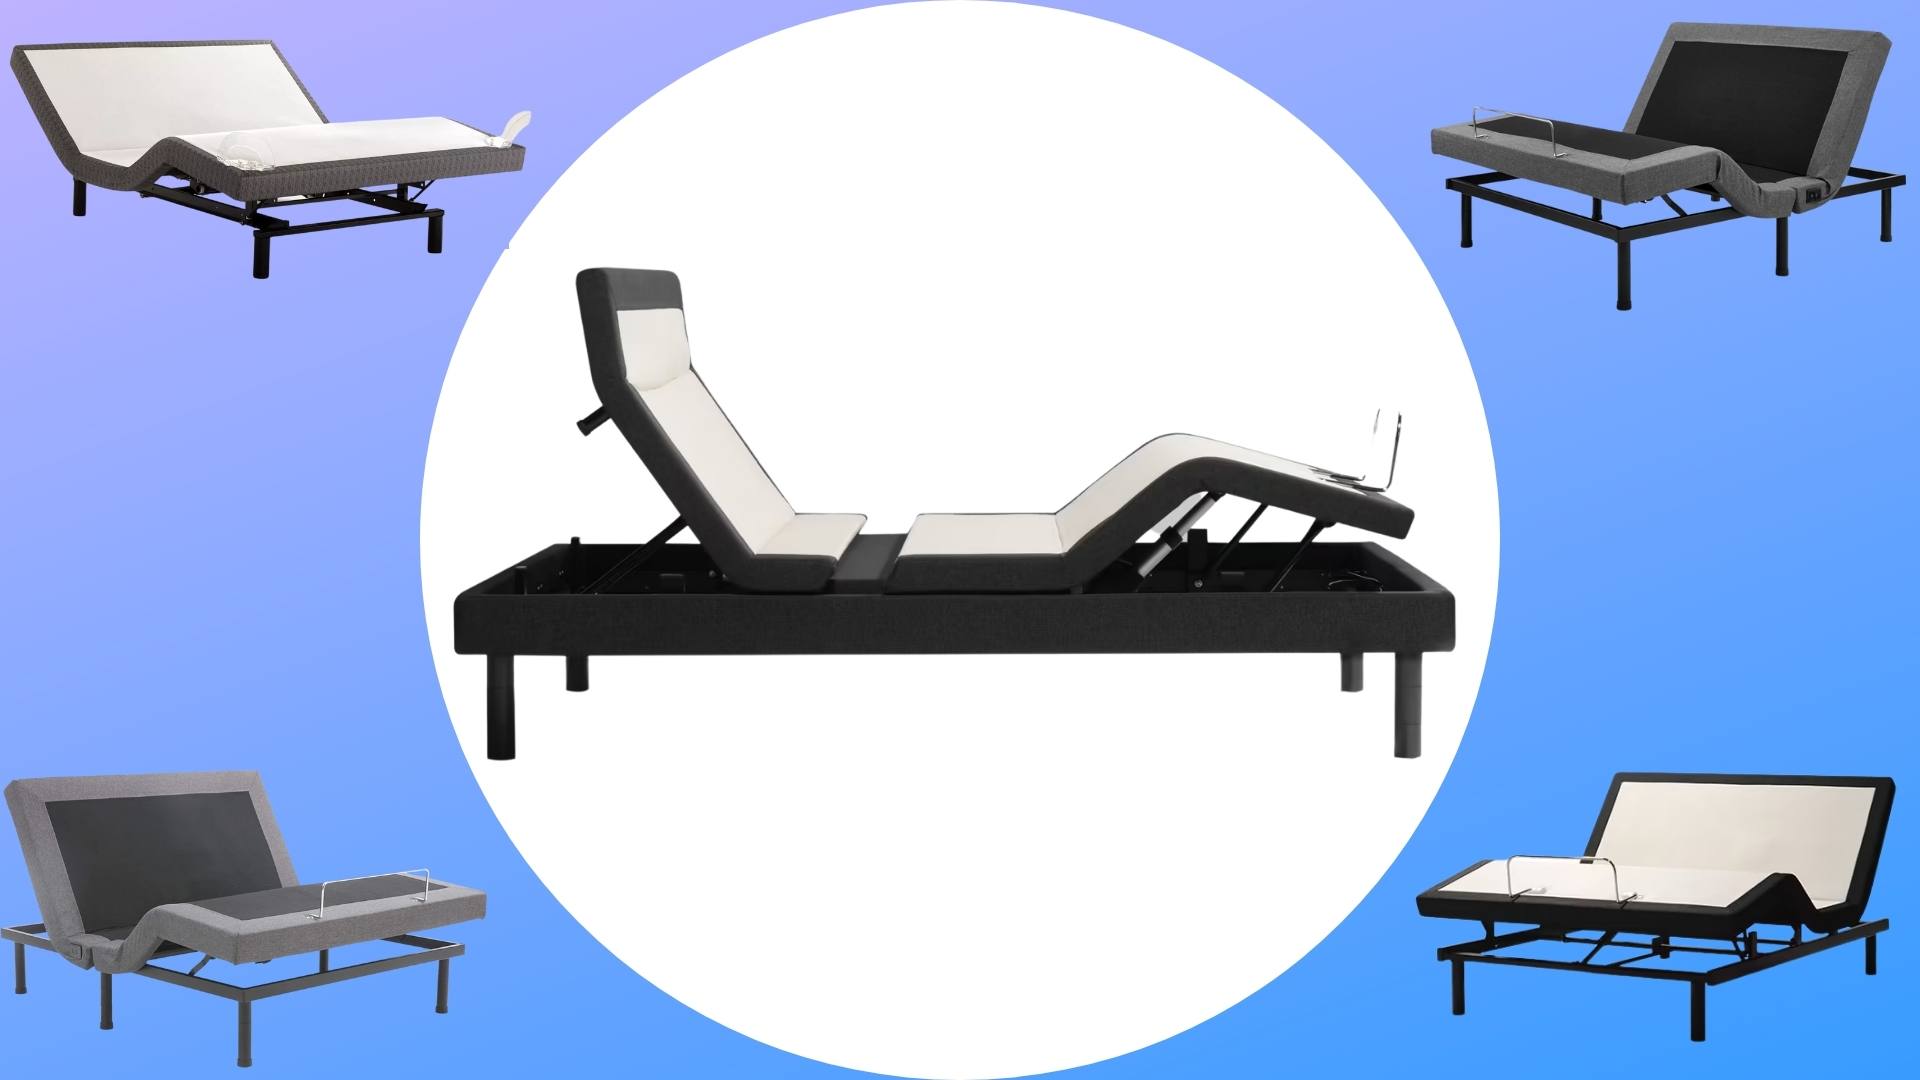 10 Best Adjustable Beds for the Elderly in 2022 - Terry Cralle